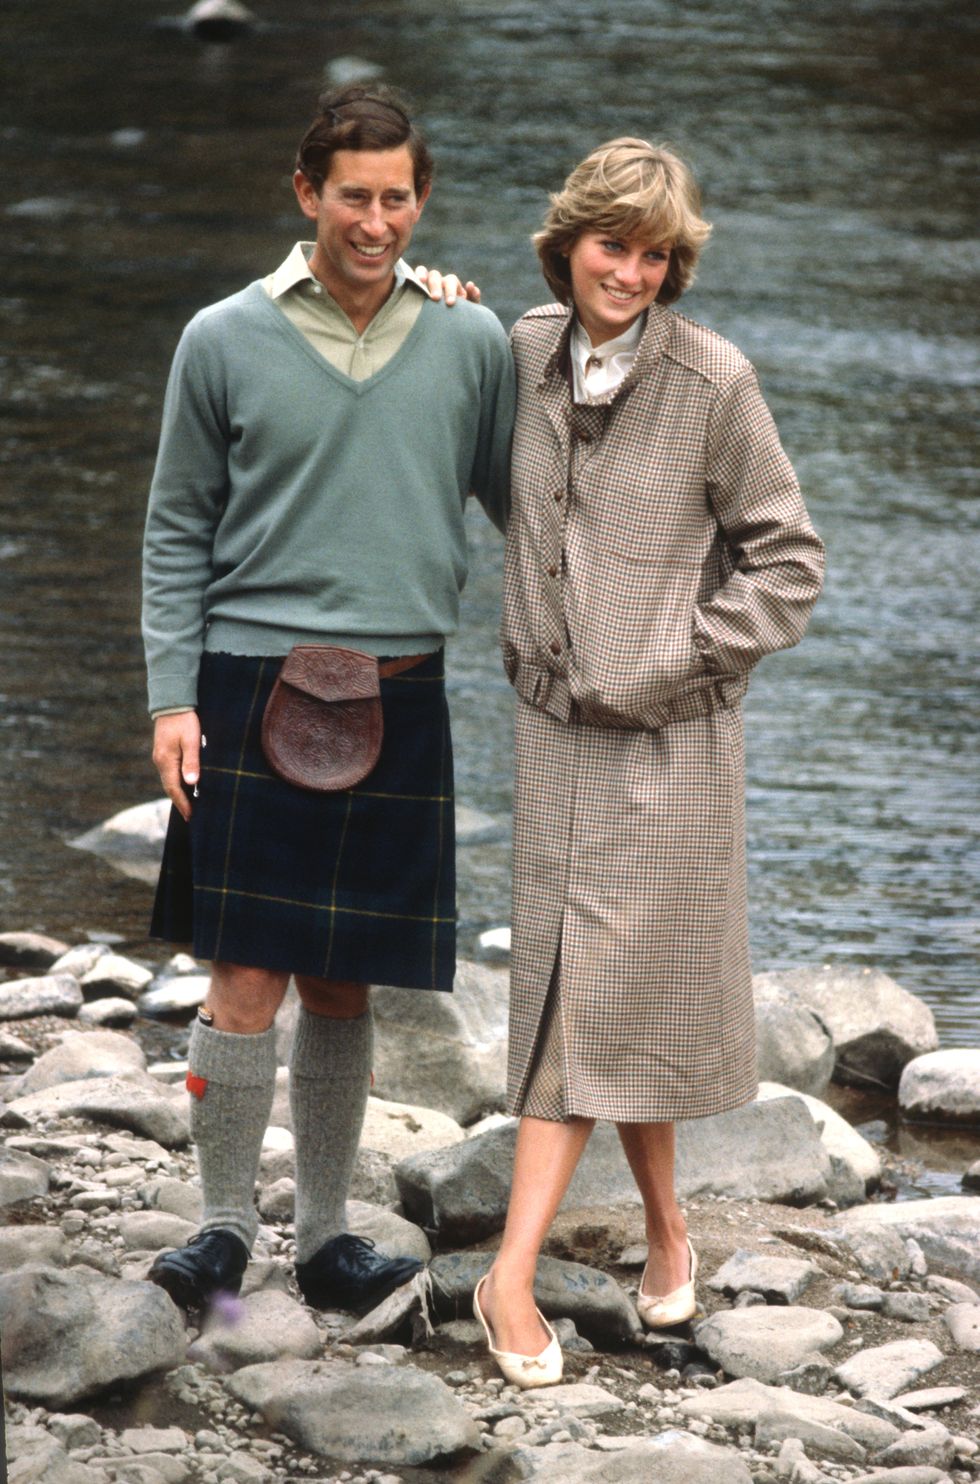 balmoral, united kingdom august 19 prince charles, prince of wales and diana, princess of wales, wearing a suit designed by bill pashley, pose for a photo on the banks of the river dee in the grounds of balmoral castle during their honeymoon on august 19, 1981 in balmoral, scotland photo by anwar husseingetty images